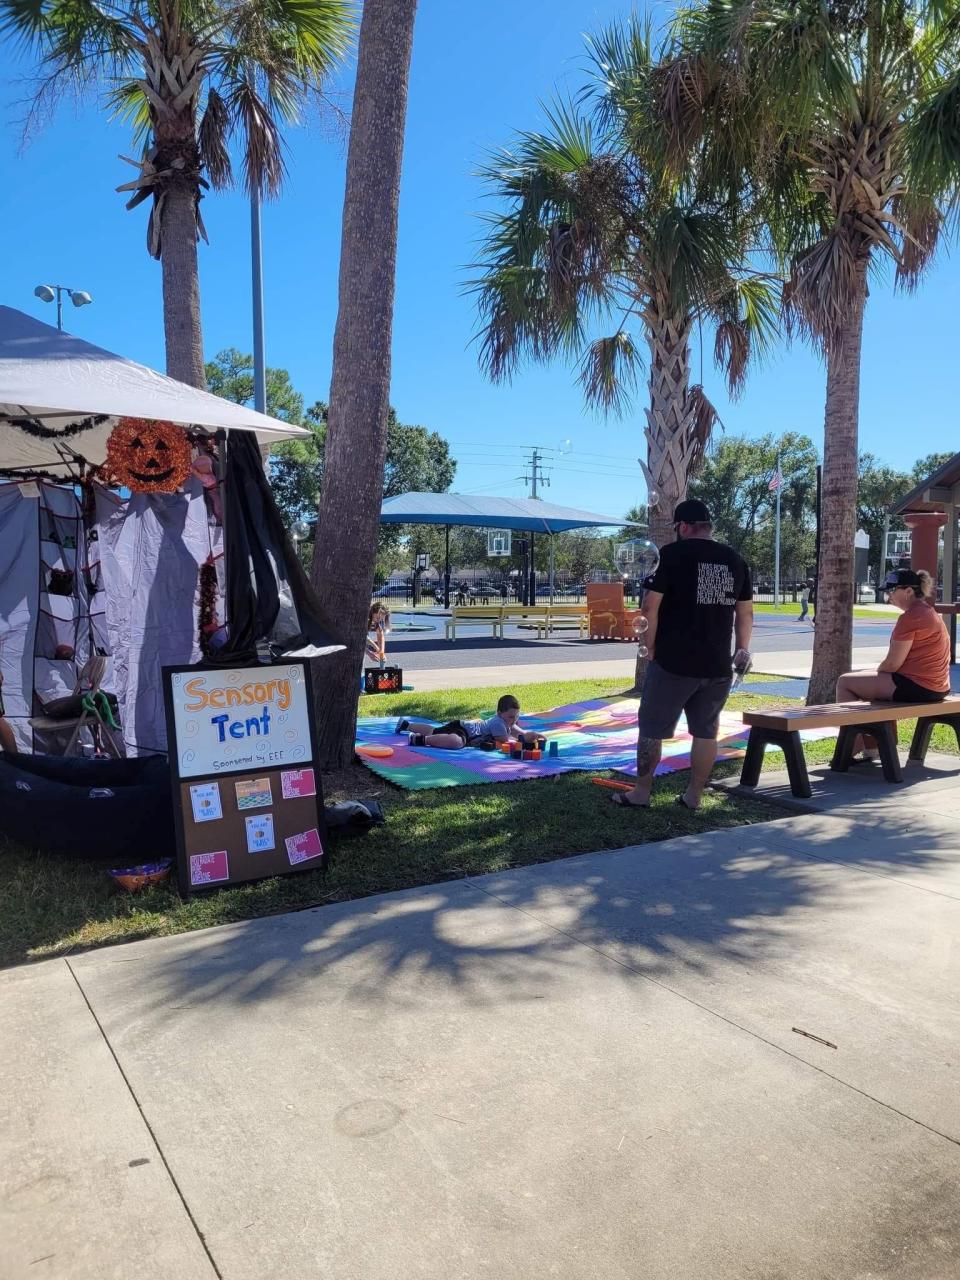 Equality and Equity for Everyone sponsored the "Sensory Tent" at a trick-or-treat event at Space Coast Field of Dreams in West Melbourne in October.